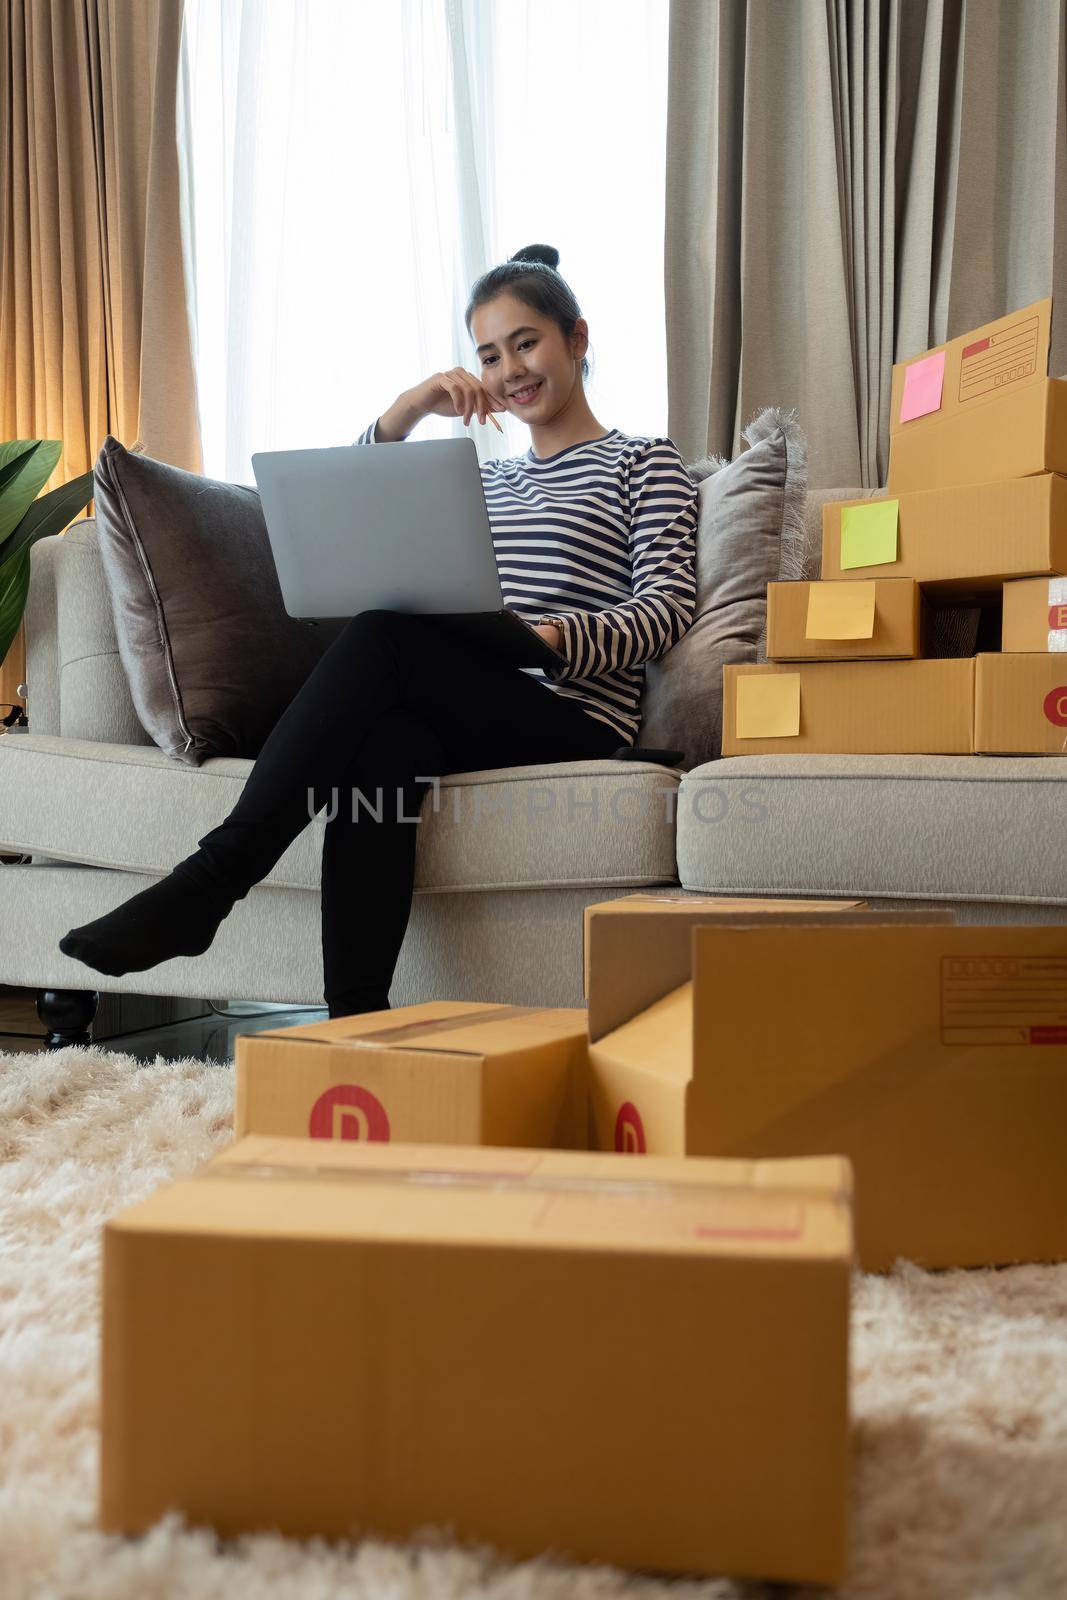 Business Start up SME concept. Young startup entrepreneur small business owner working at home, packaging and delivery situation. Women, owener of small business packing product in boxes.